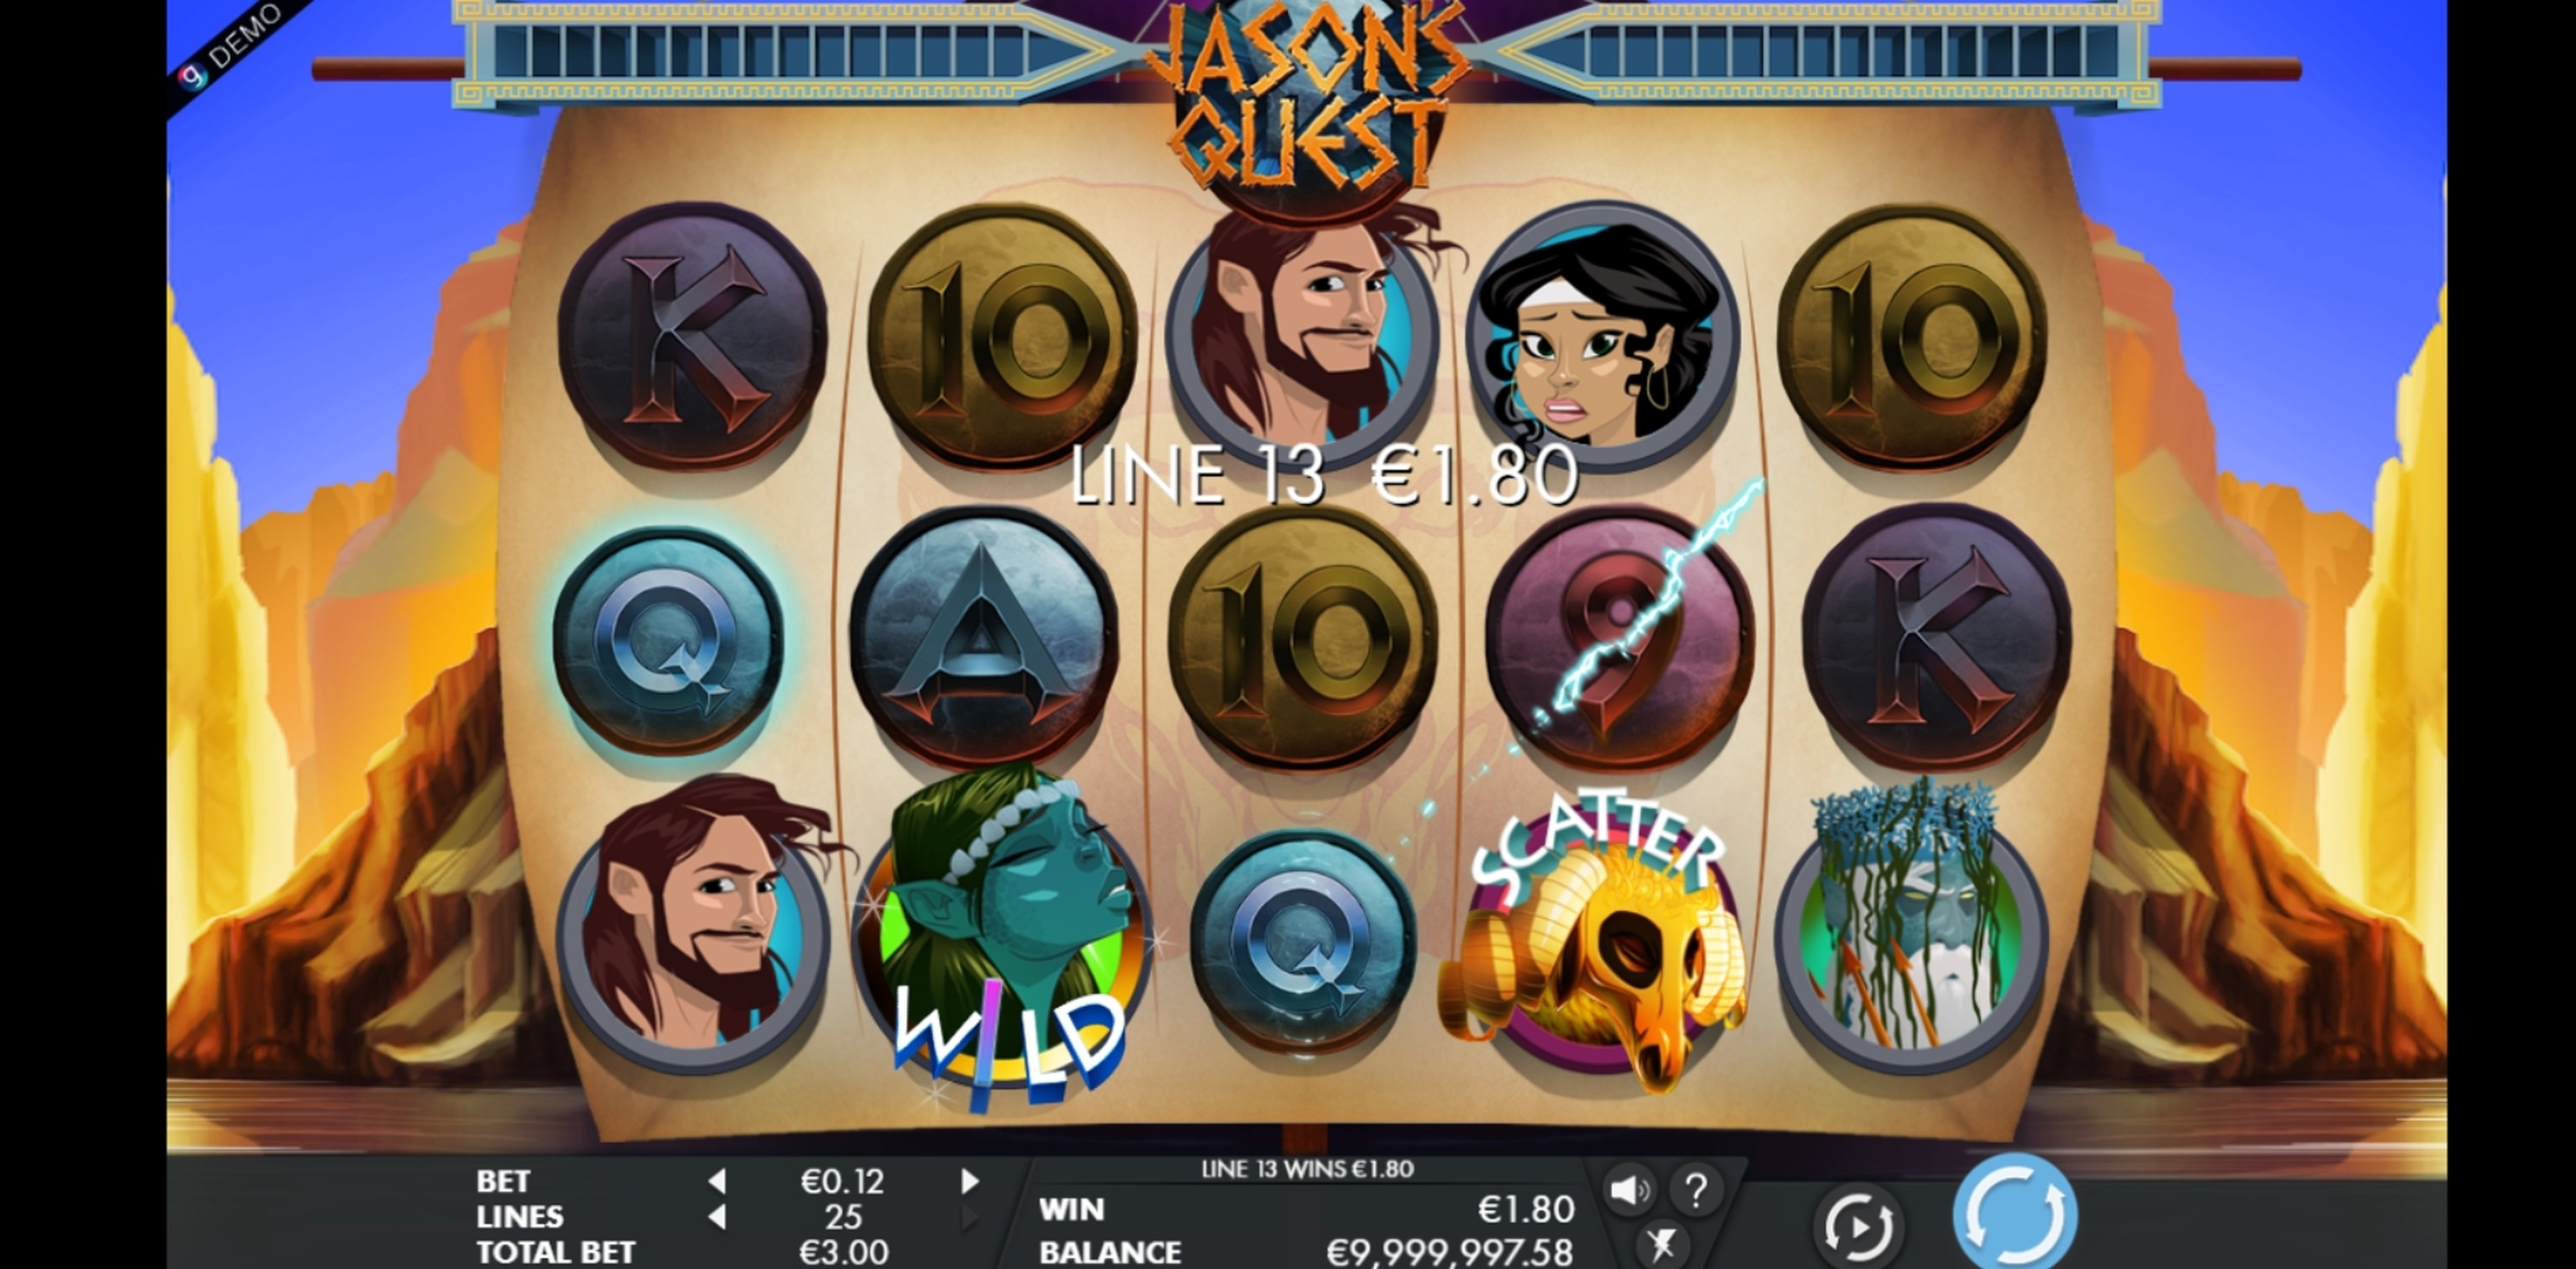 Win Money in Jason's Quest Free Slot Game by Genesis Gaming